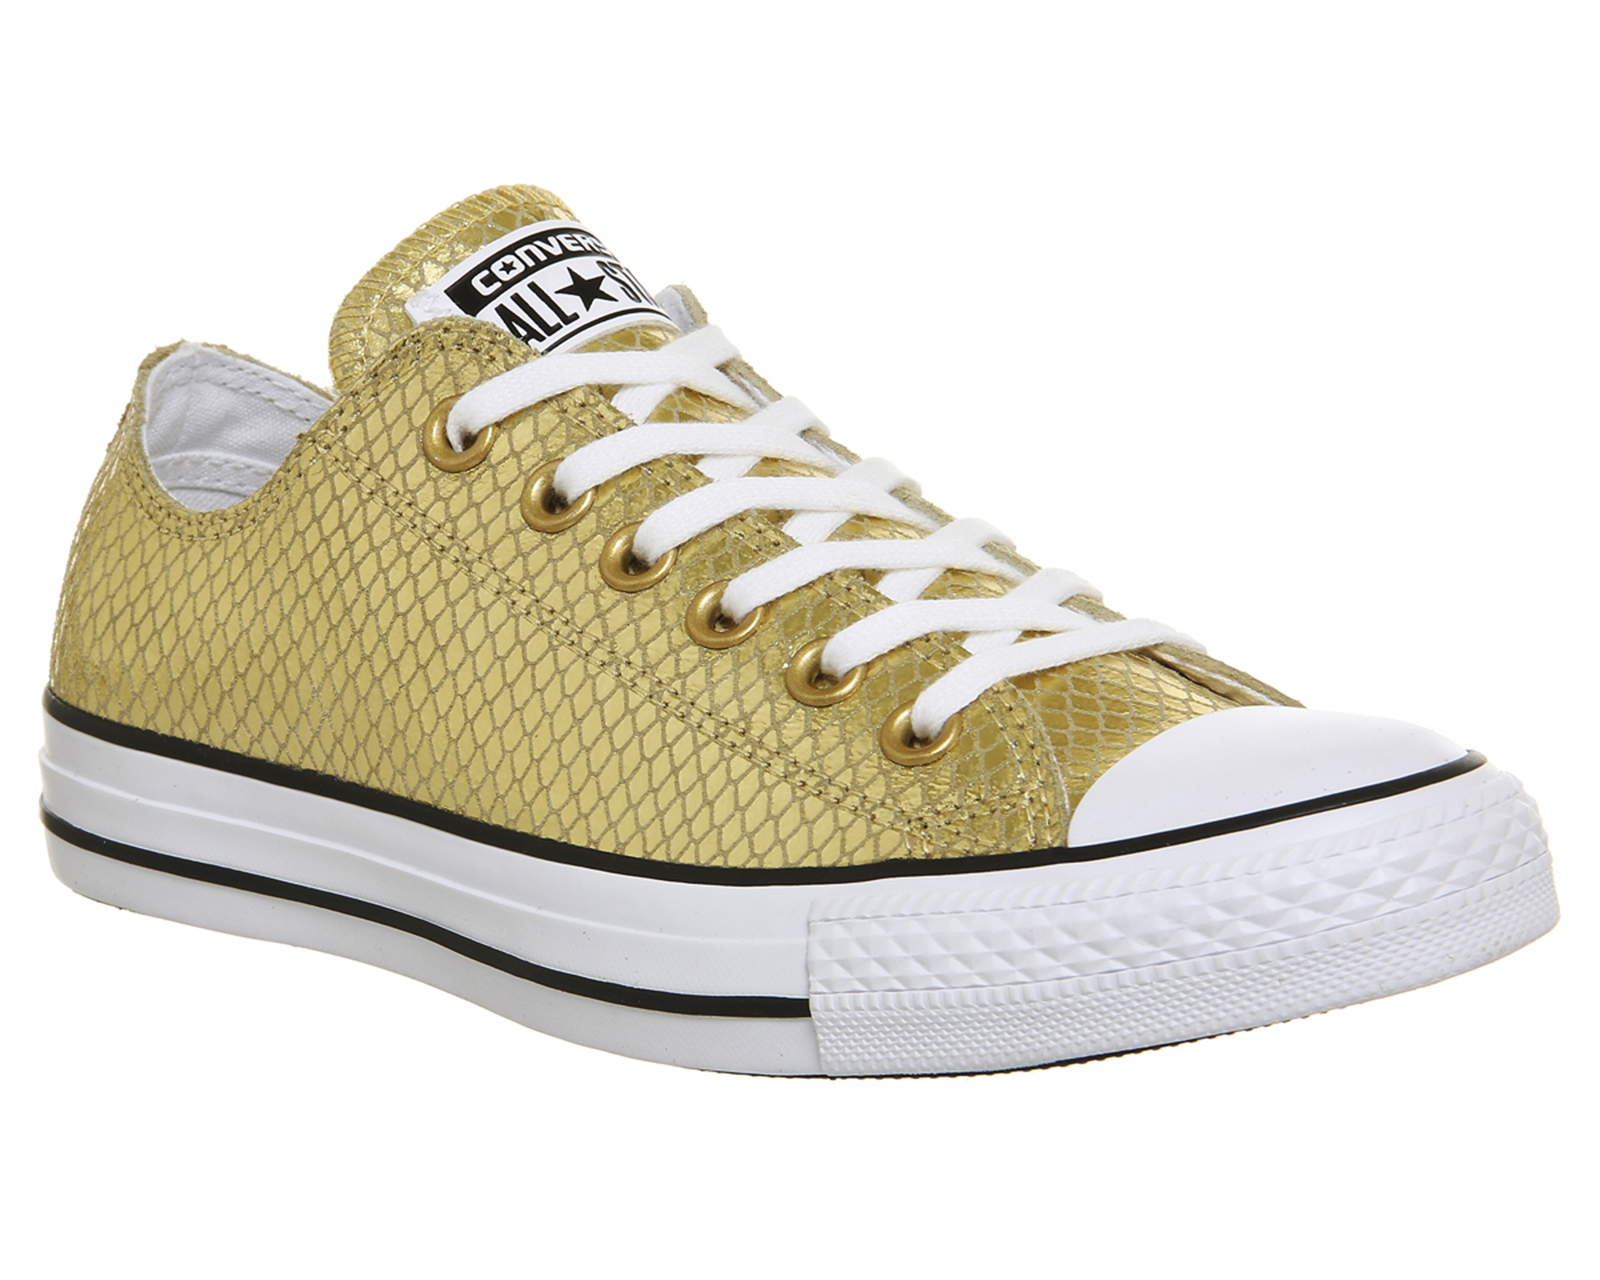 converse metallic collection off 58% - www.bvf-33.com